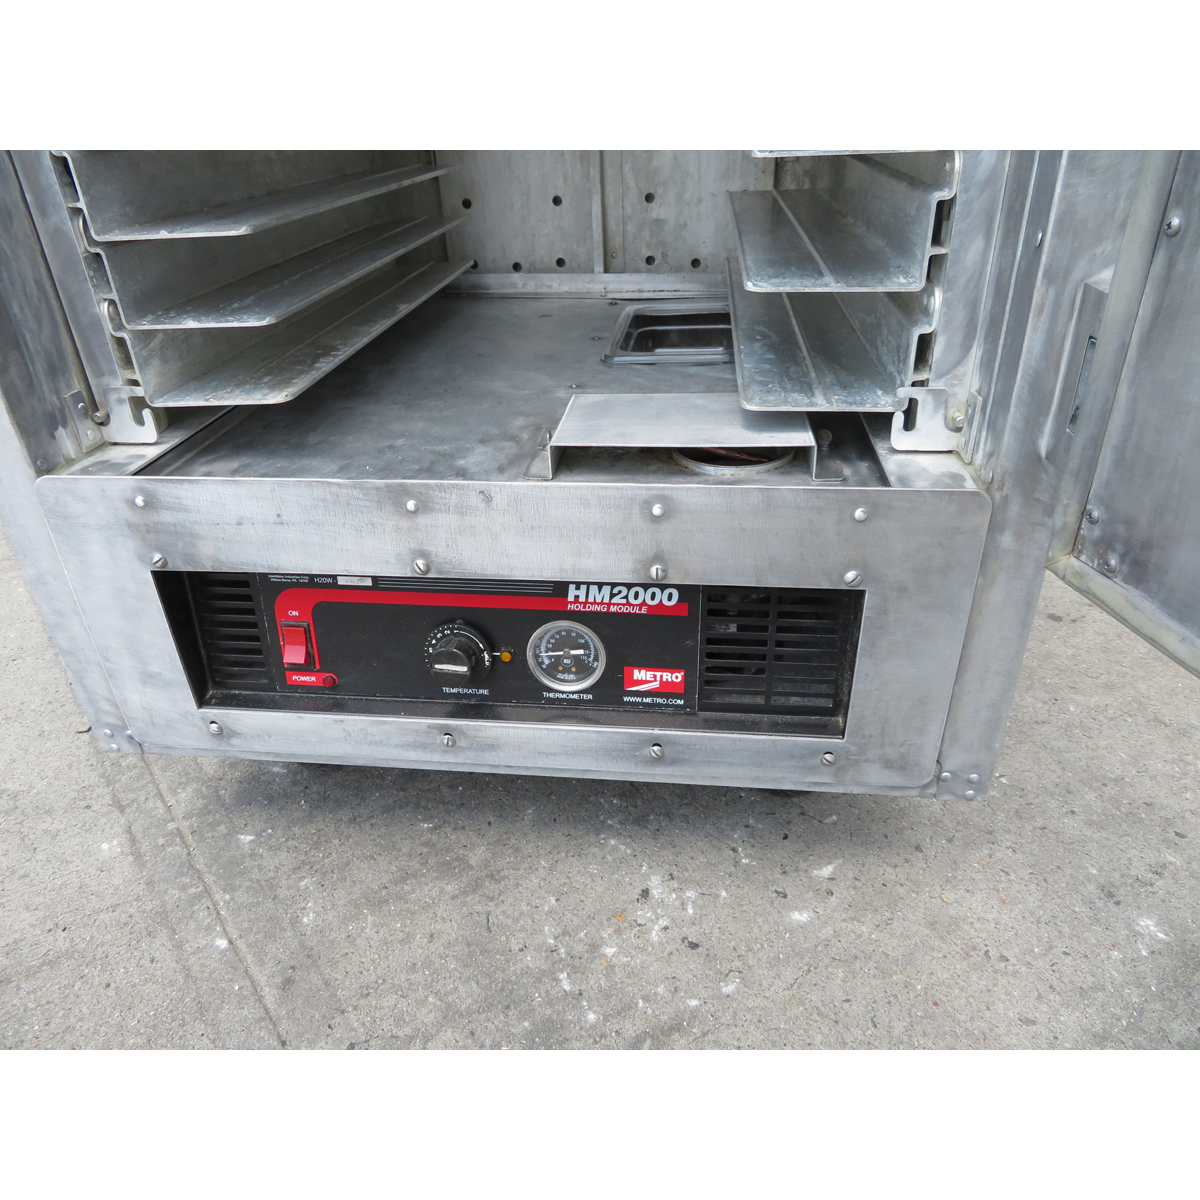 Metro C199-HM2000 Heating Cabinet Food Warmer, Used Excellent Condition image 5